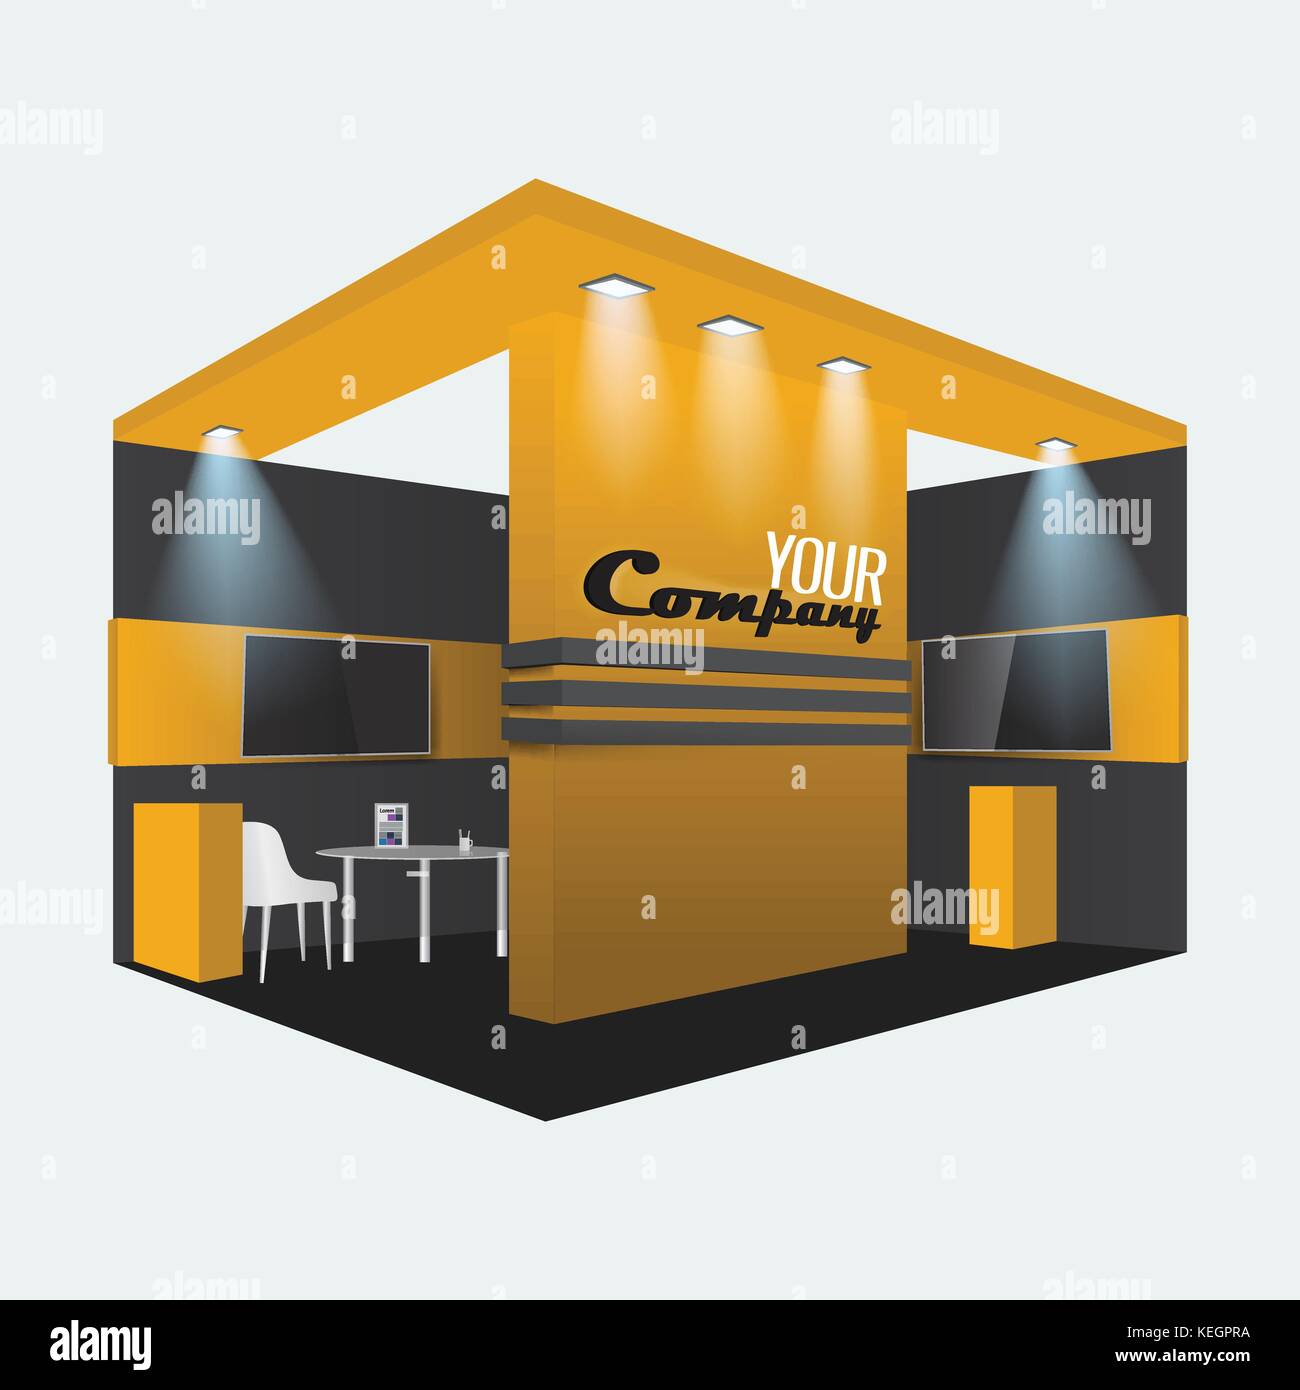 Download Exhibition Stand Display Trade Booth Mockup Design Orange And Black Stock Vector Image Art Alamy PSD Mockup Templates